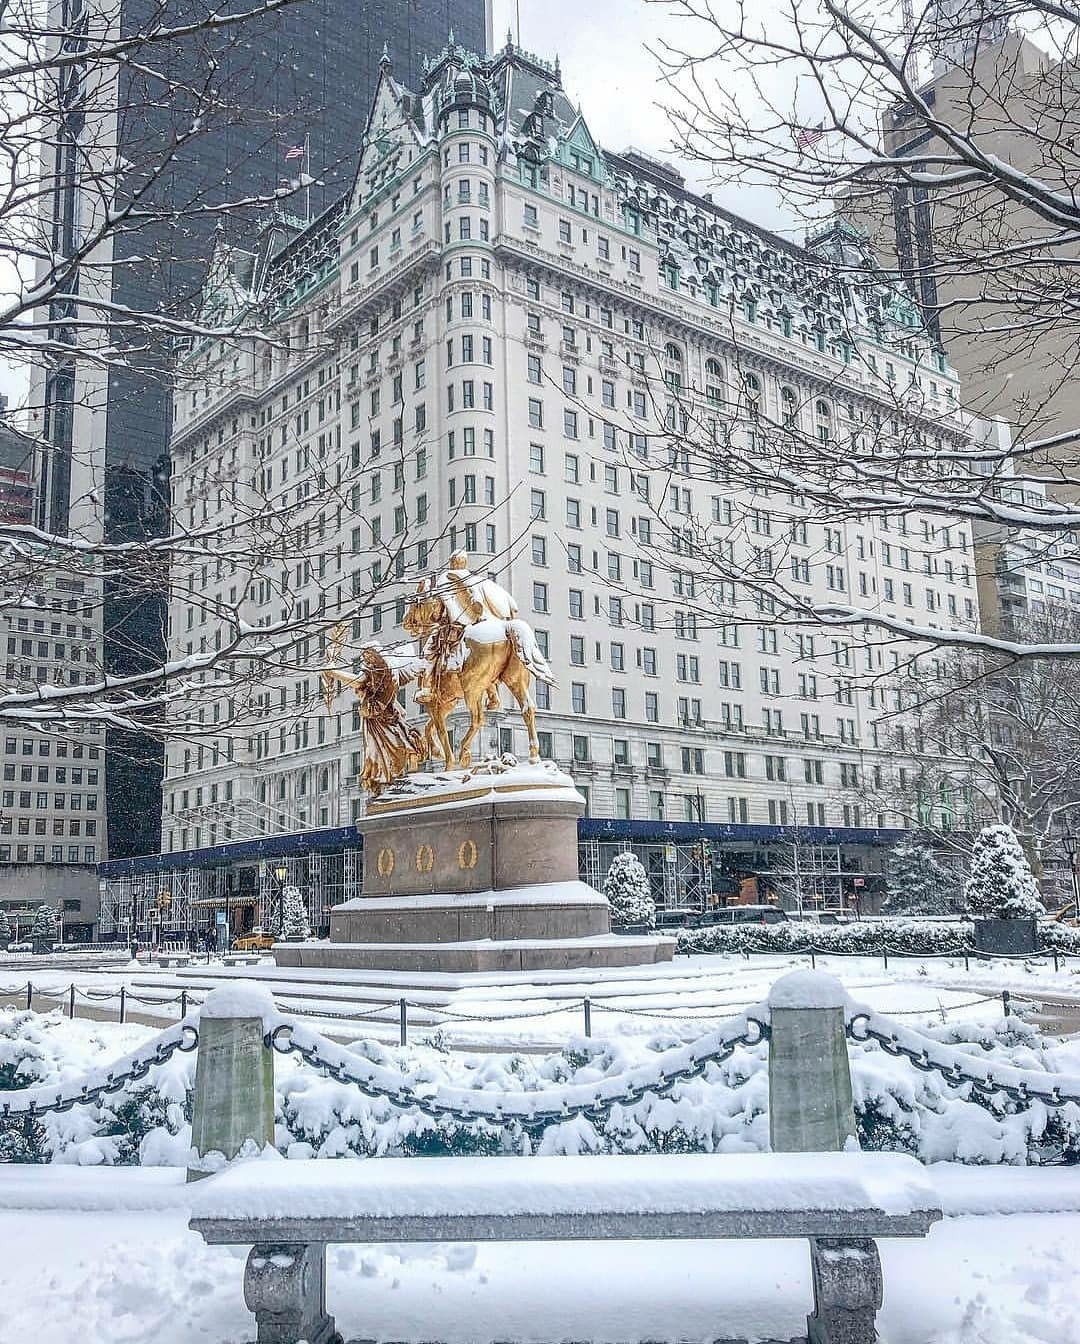 The Plaza Hotel Pictures Of Newyork